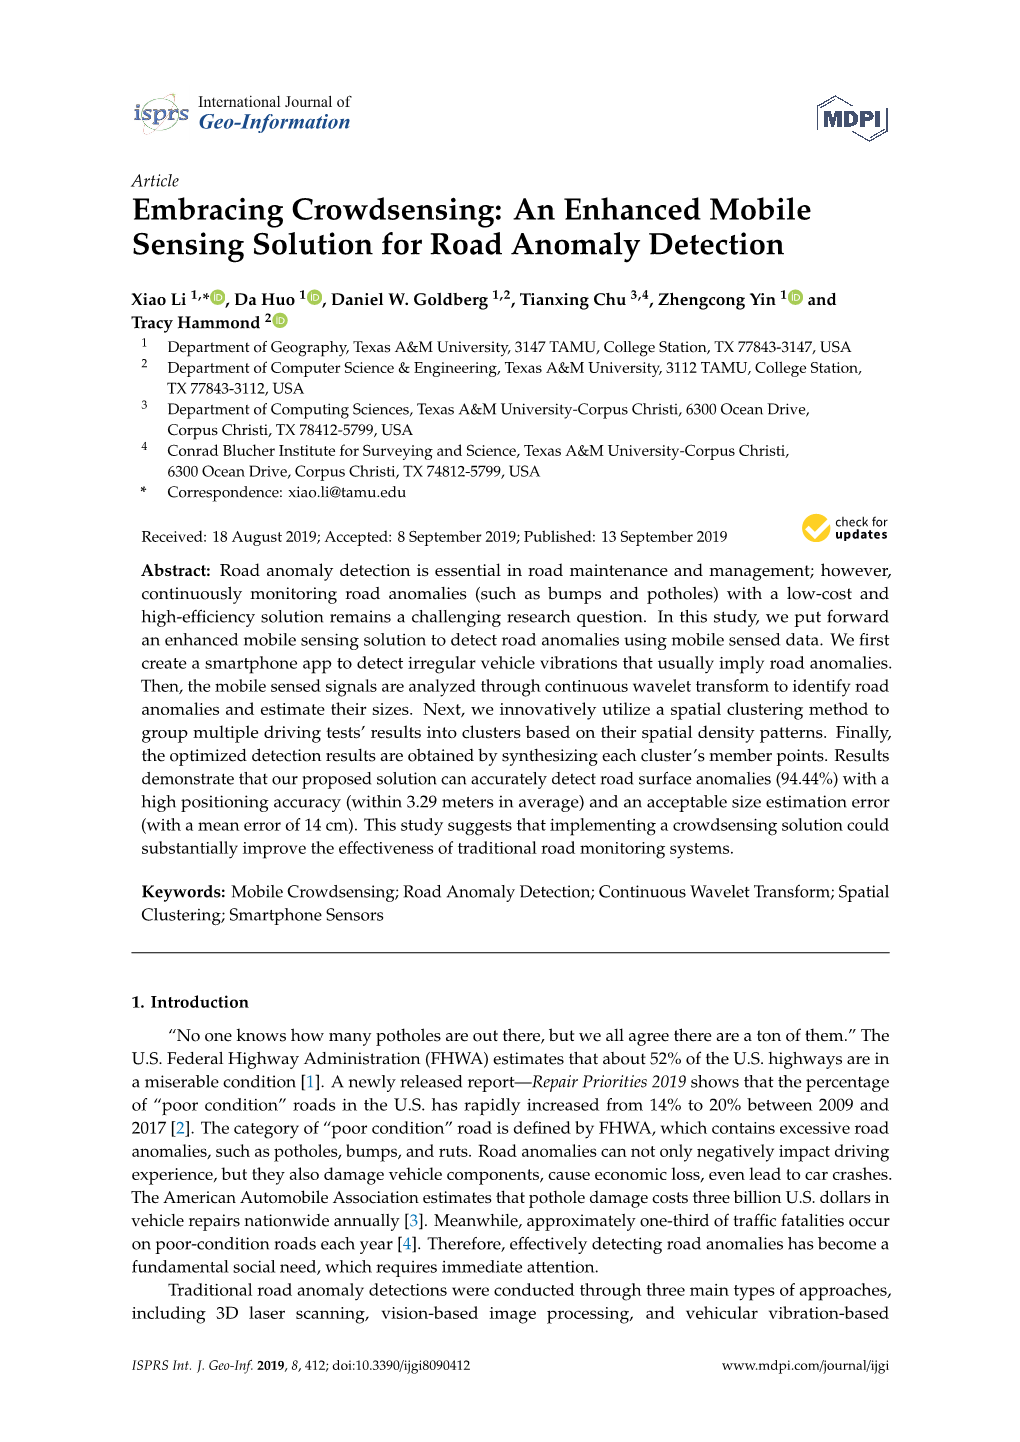 Embracing Crowdsensing: an Enhanced Mobile Sensing Solution for Road Anomaly Detection